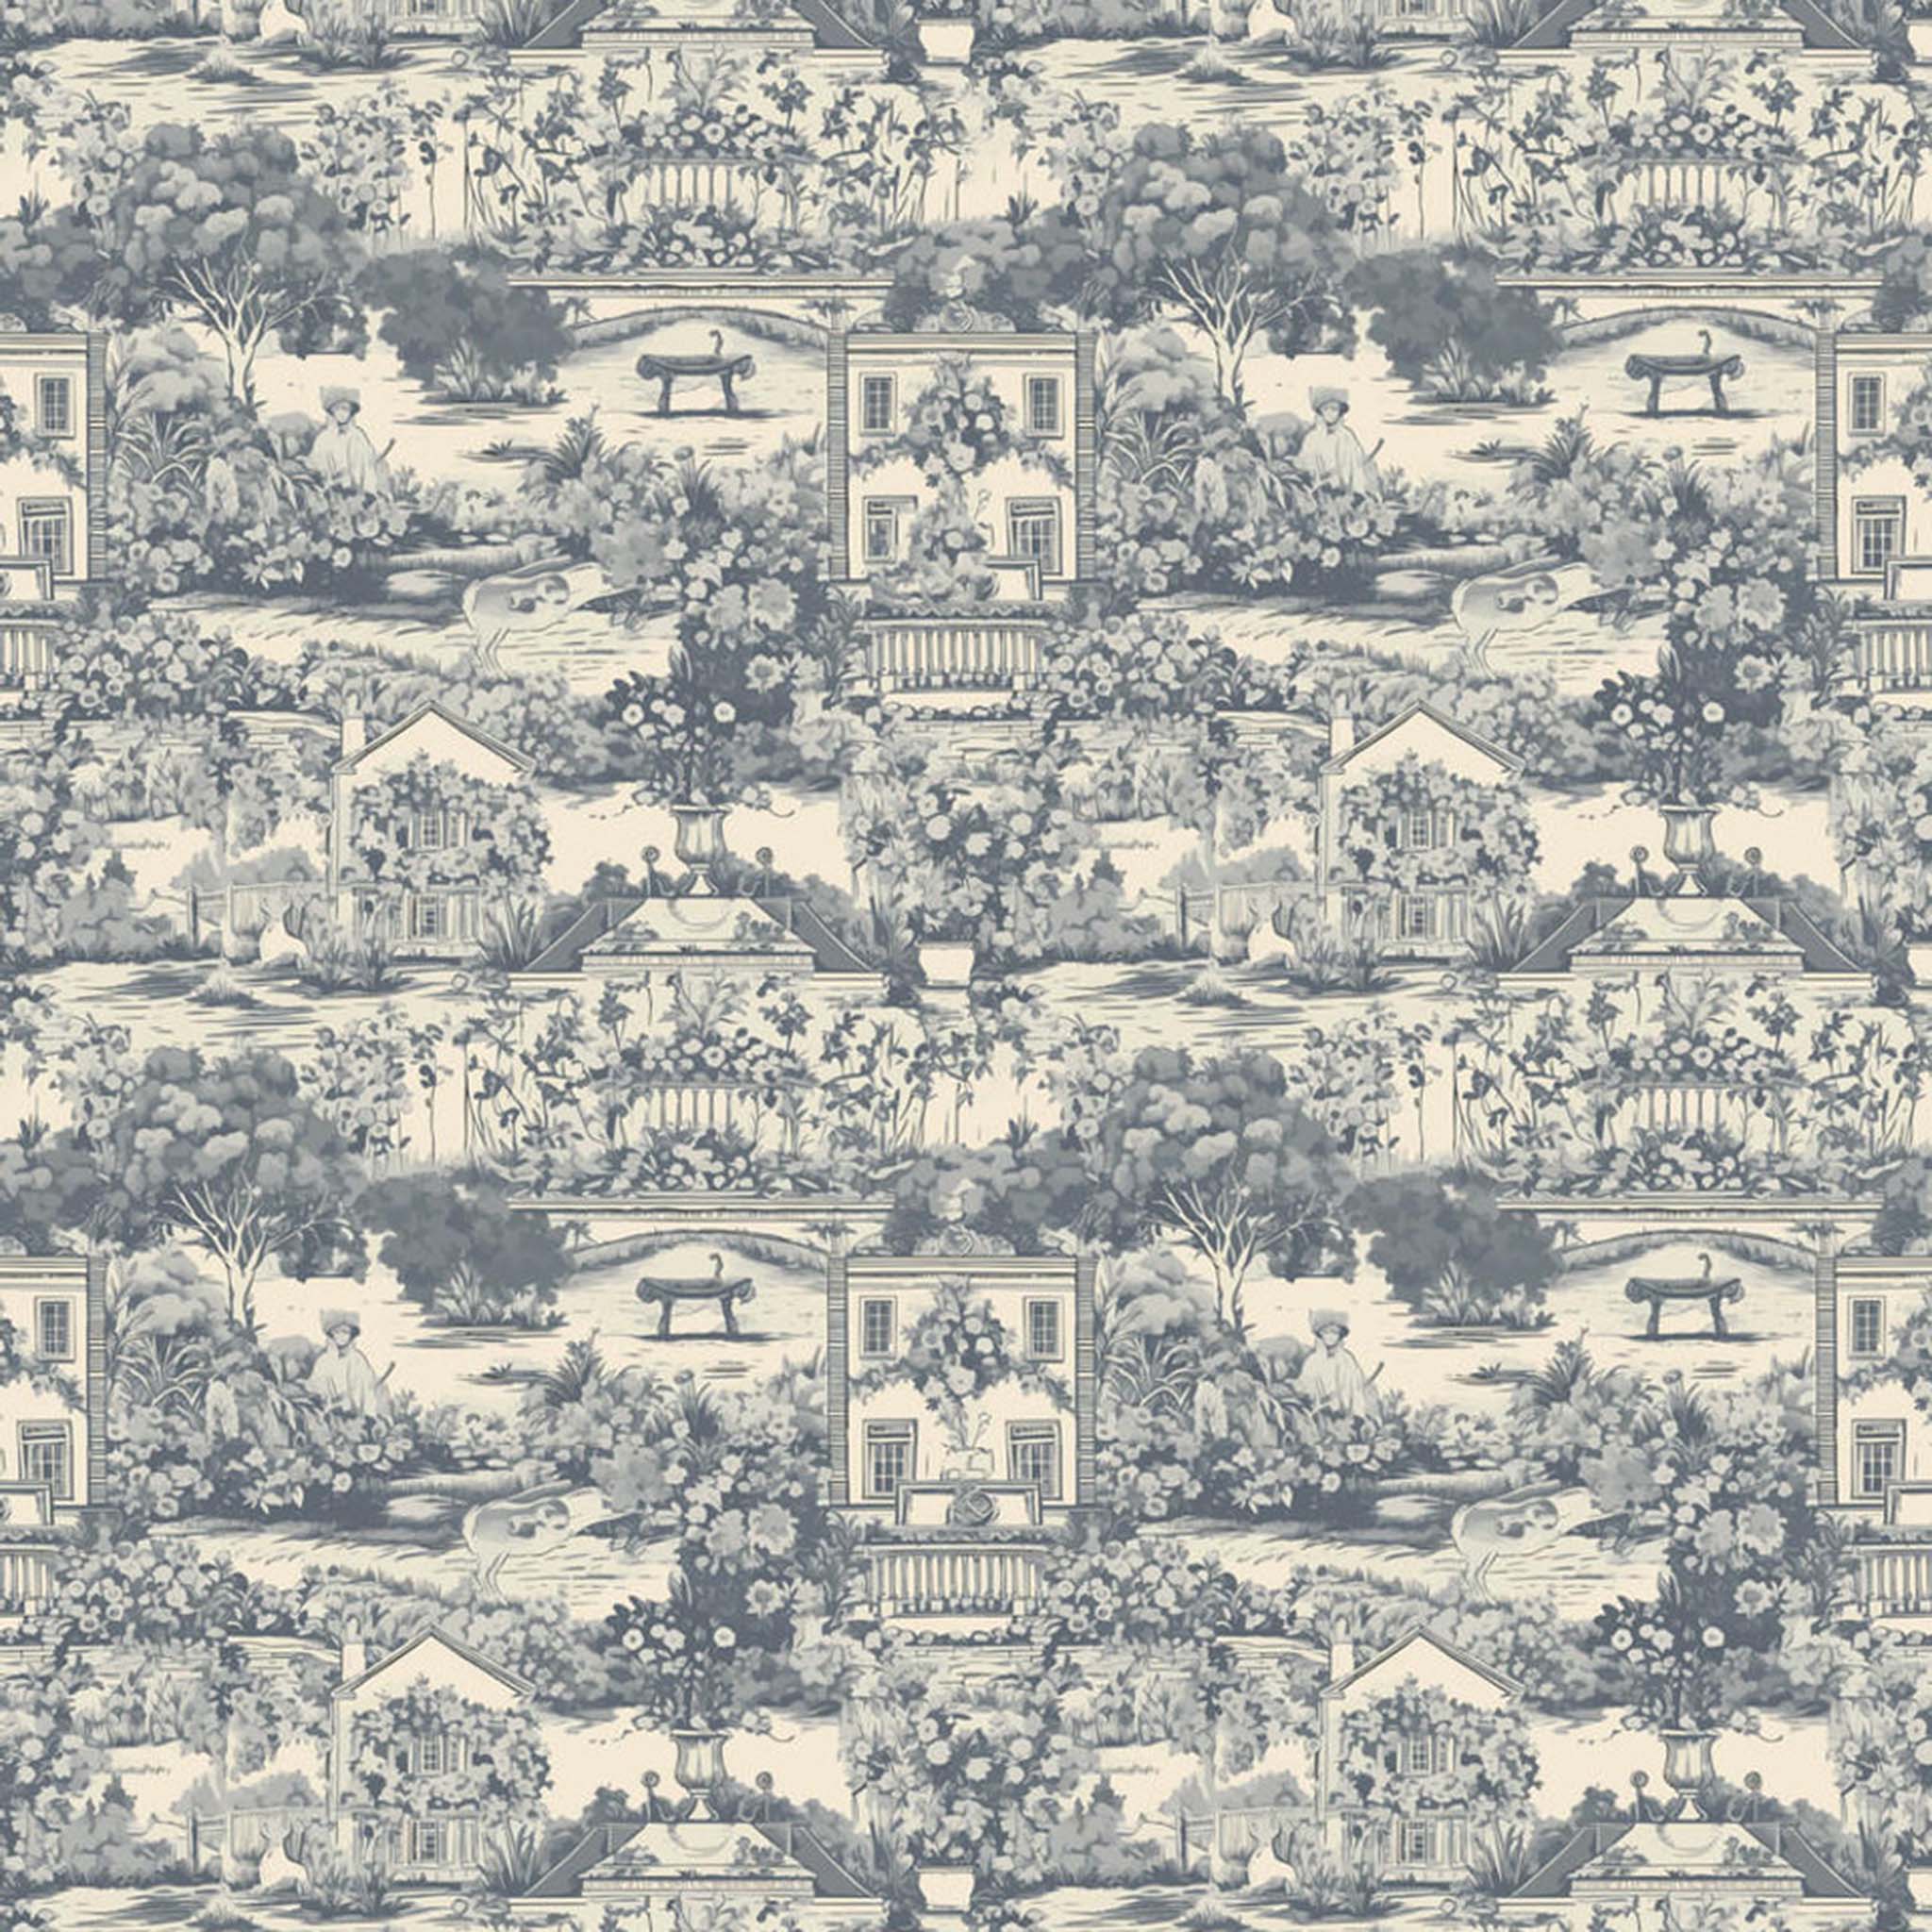 Close-up of an A3 rice paper that features a faded blue floral toile pattern with charming houses and gardens.